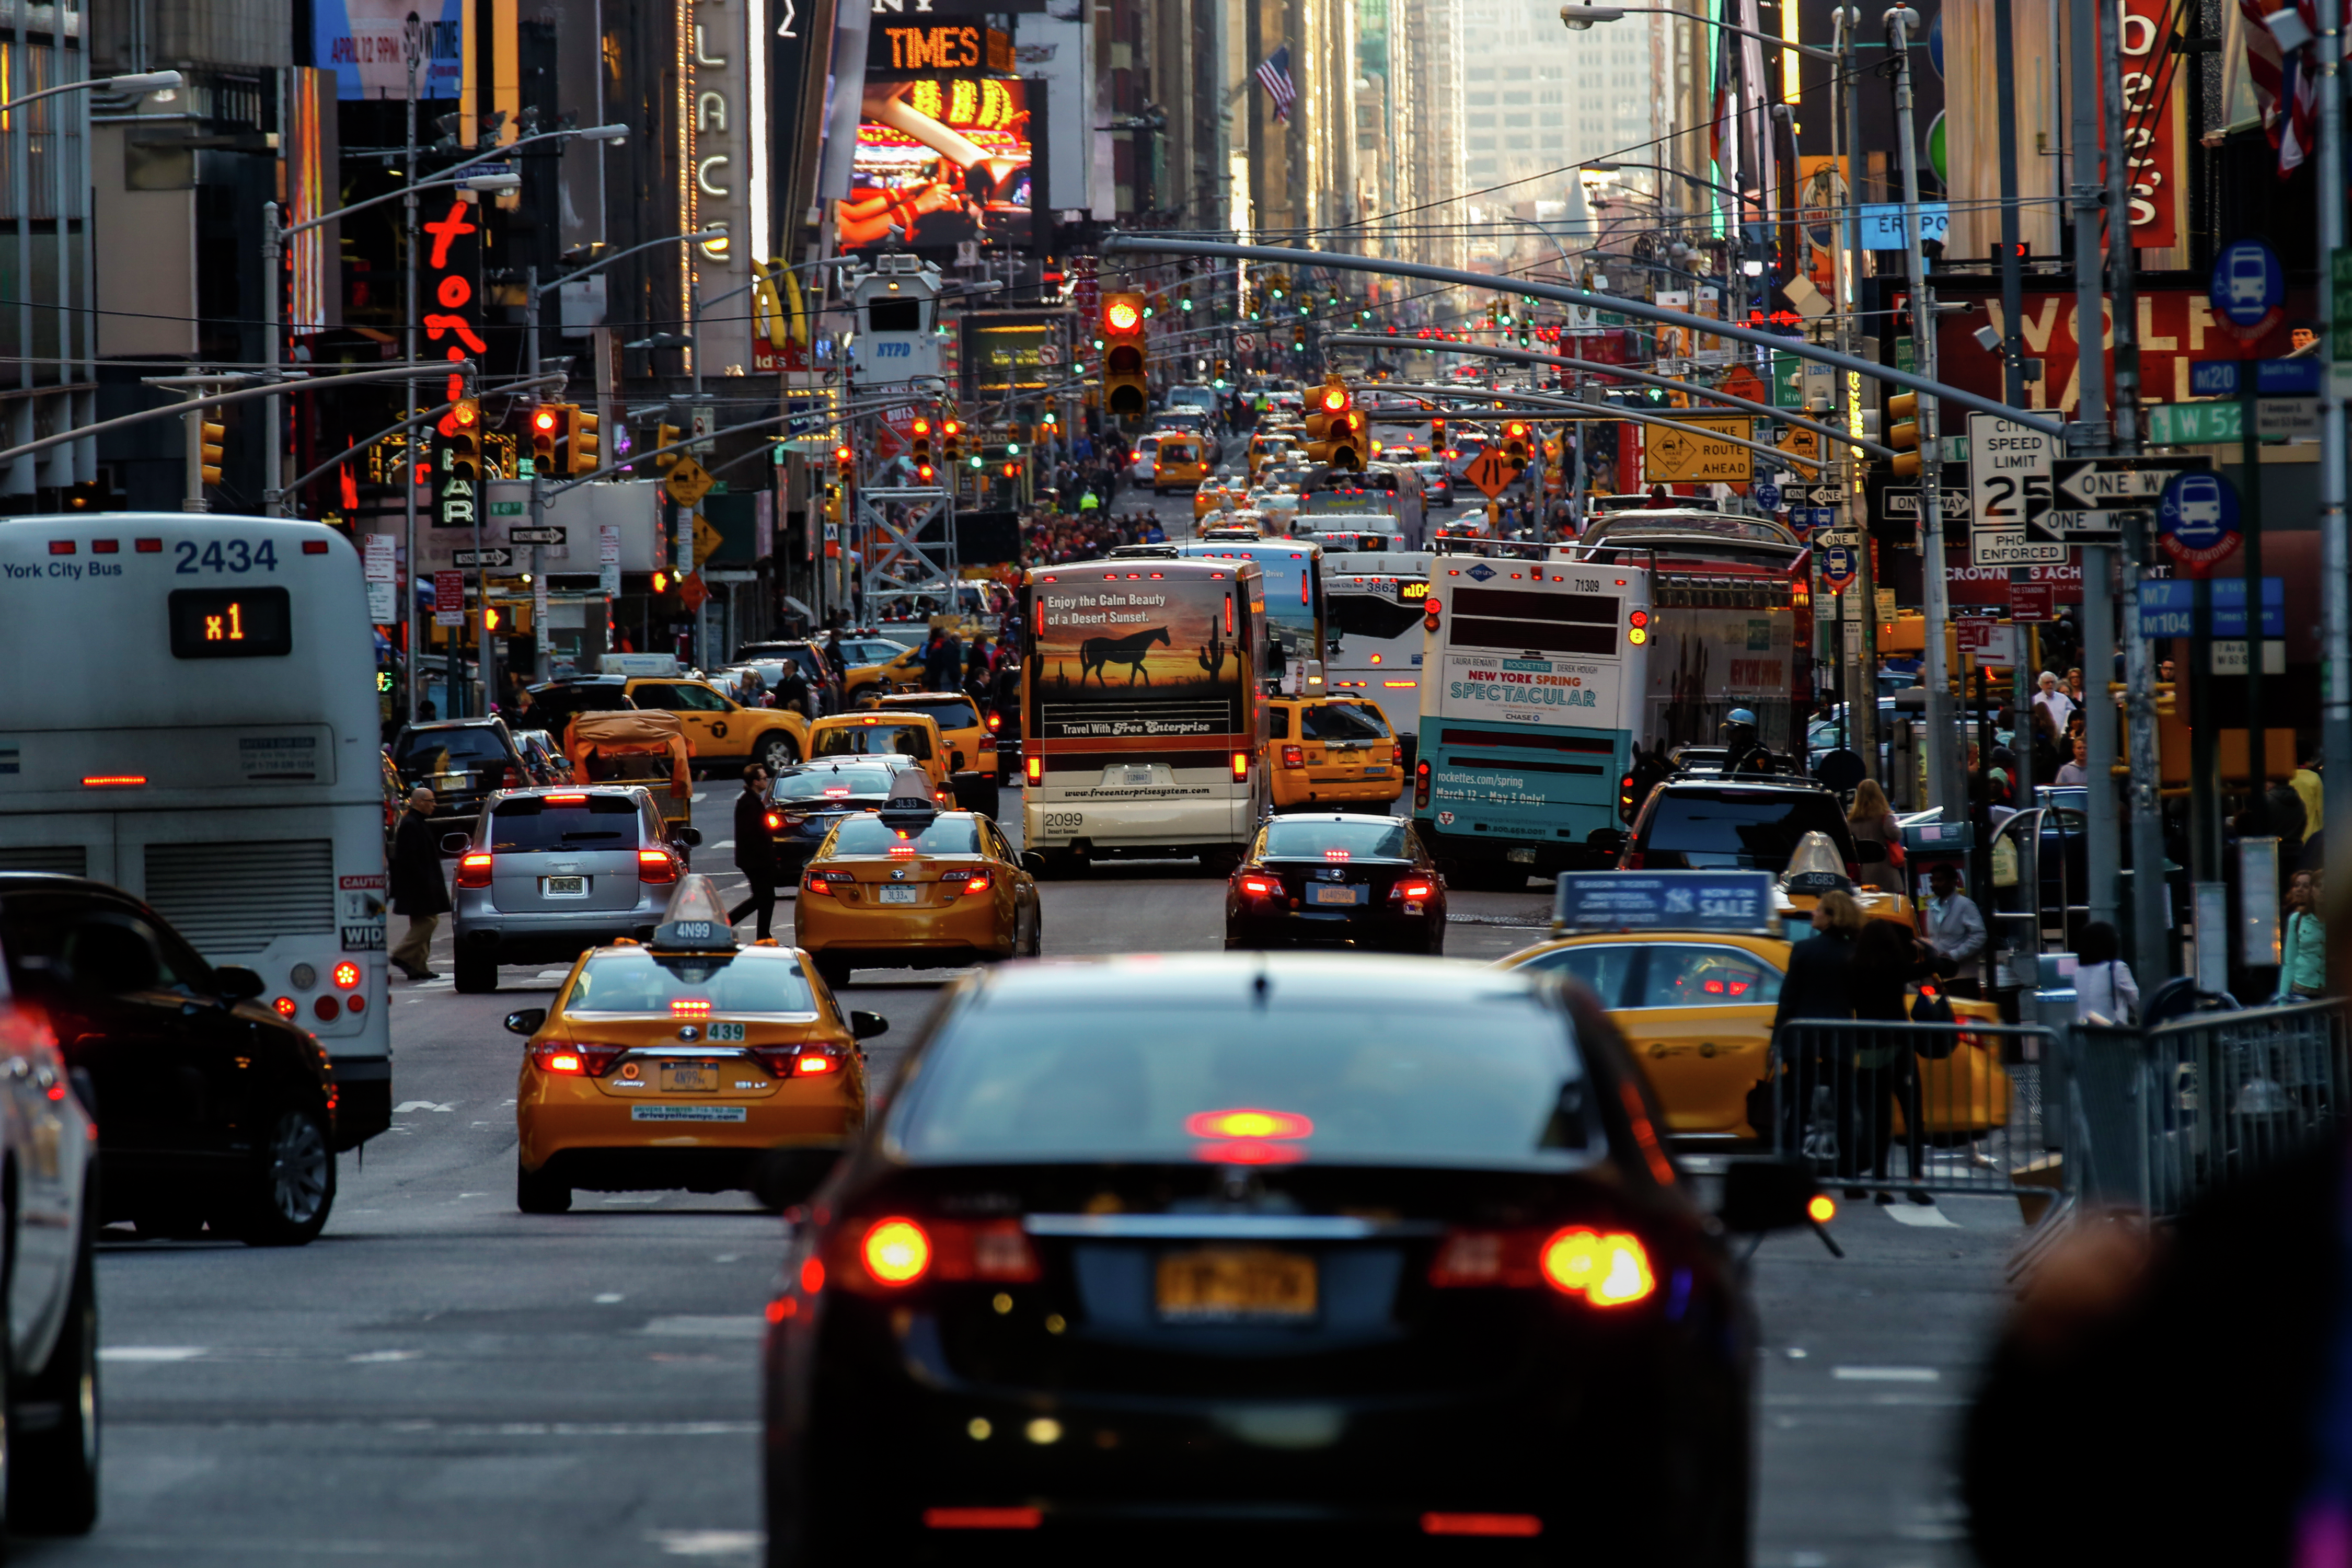 ON THE RECORD: There's been a spike in traffic fatalities in NY